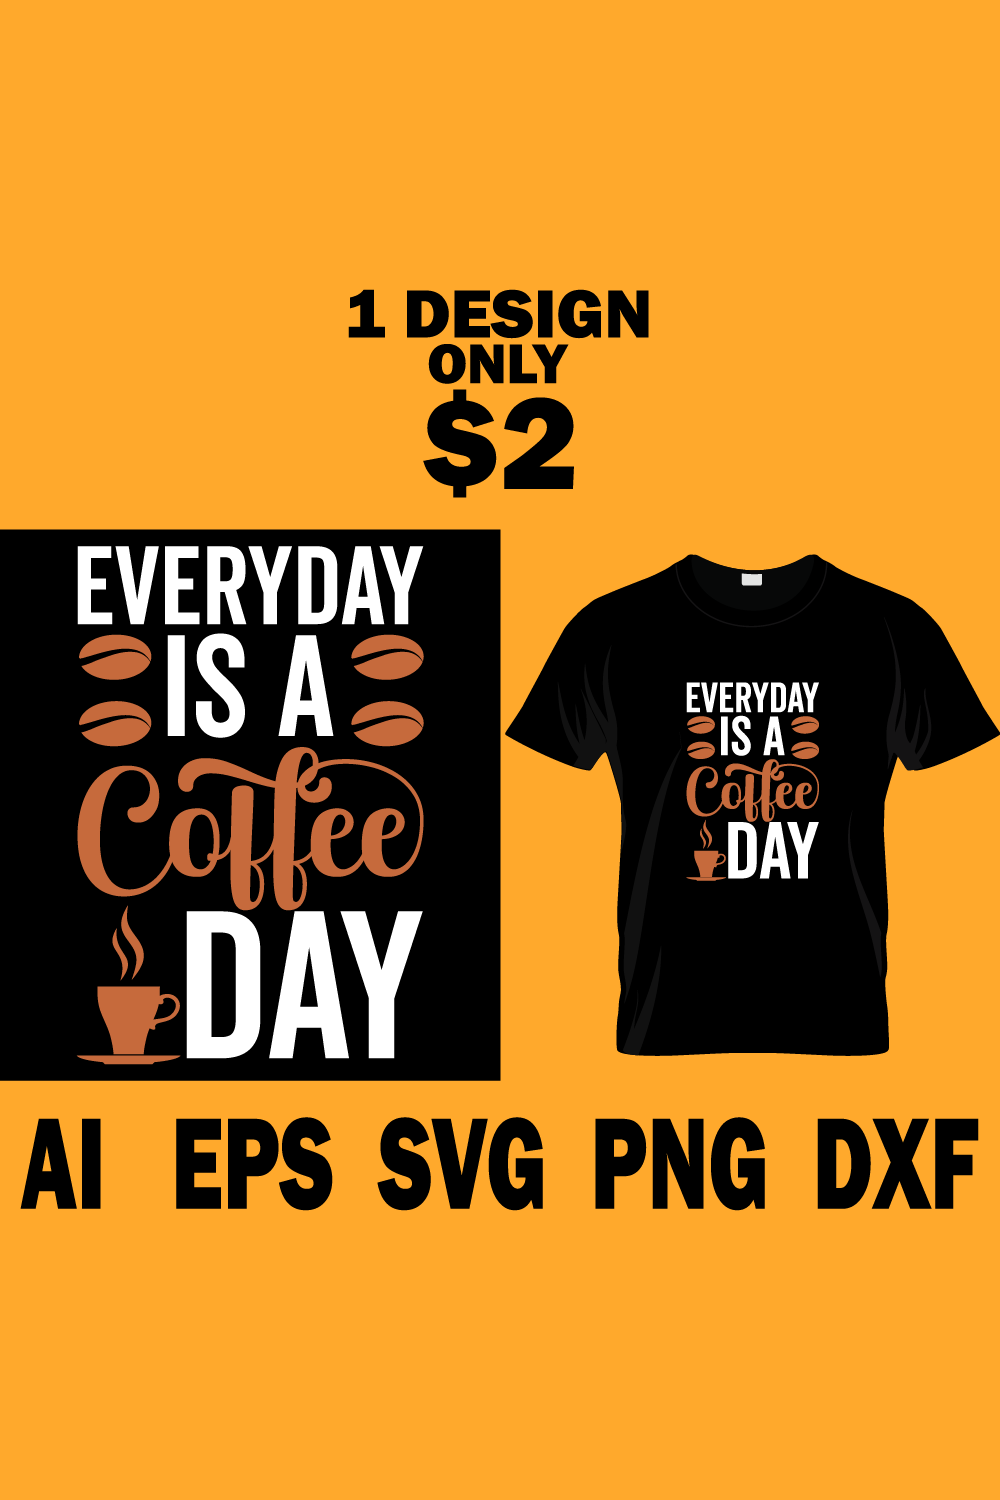 Image of a black t-shirt with an irresistible inscription Every day is a coffee day